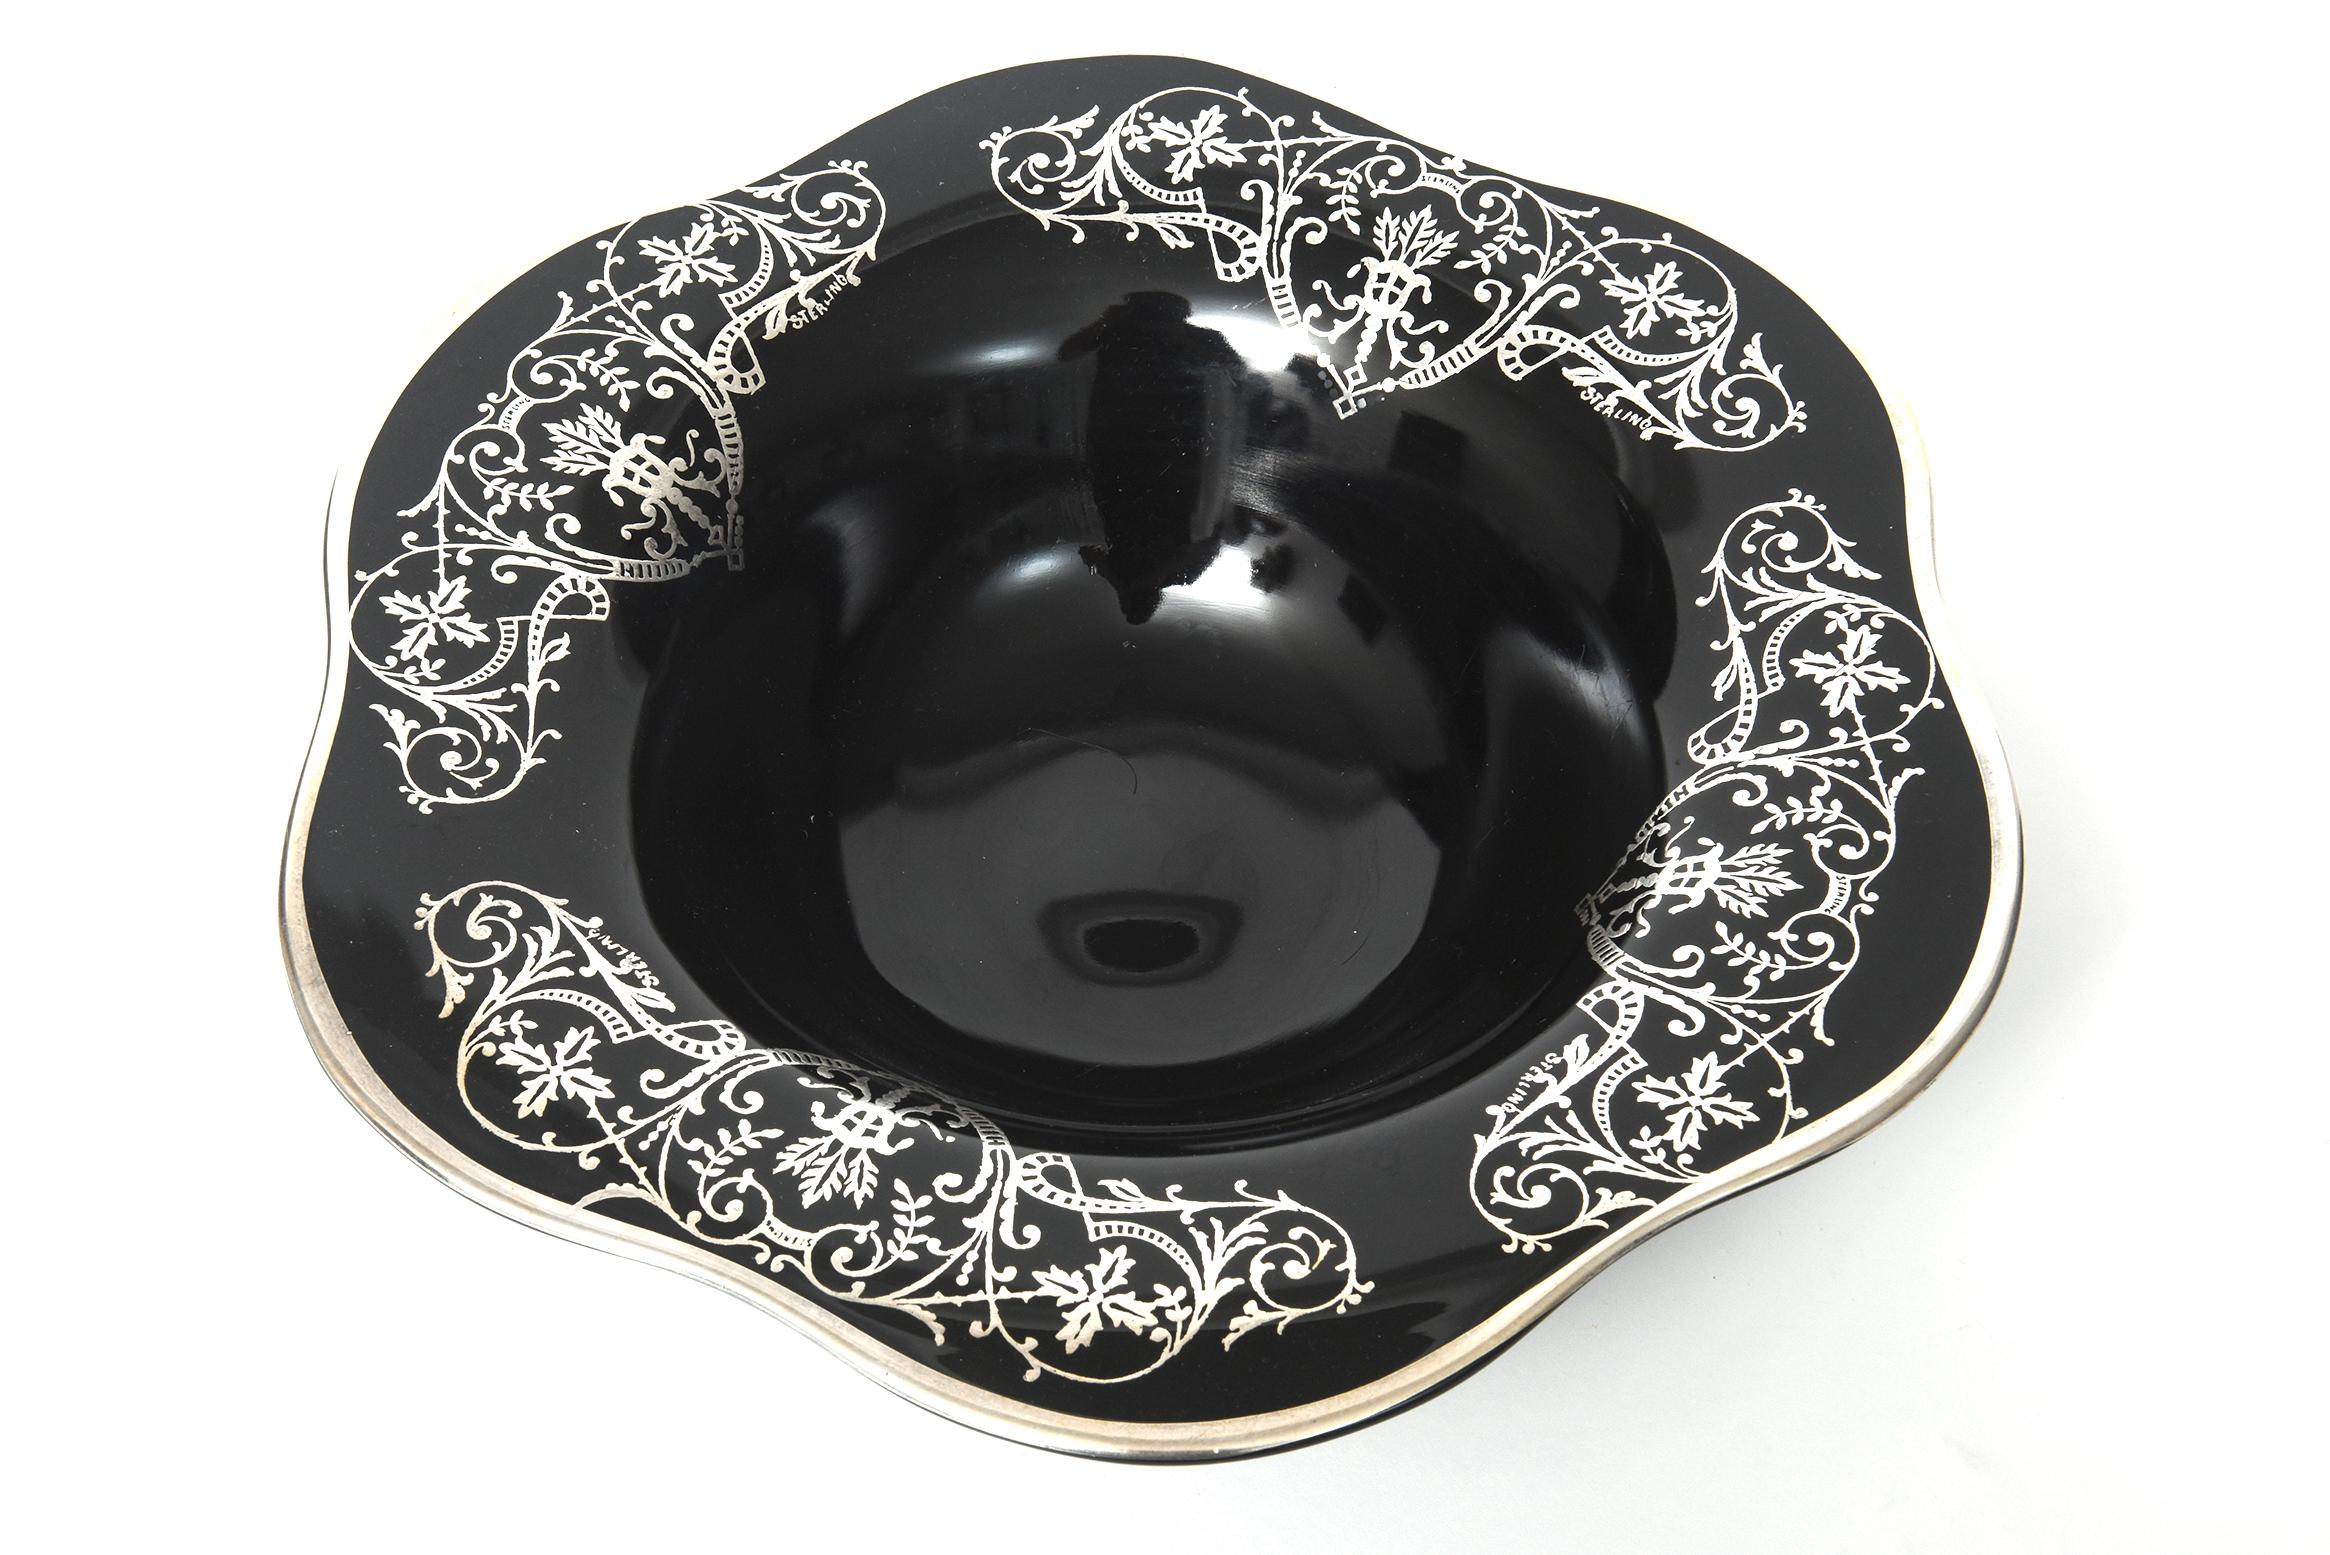 Dramatic early 20th century sterling silver overlay three footed bowl featuring a foliate cartouche leaf, flower and scroll design on a rare flower shaped shiny ebony black glass bowl.  The bowl sits on three legs that end in rounded feet.  Each of